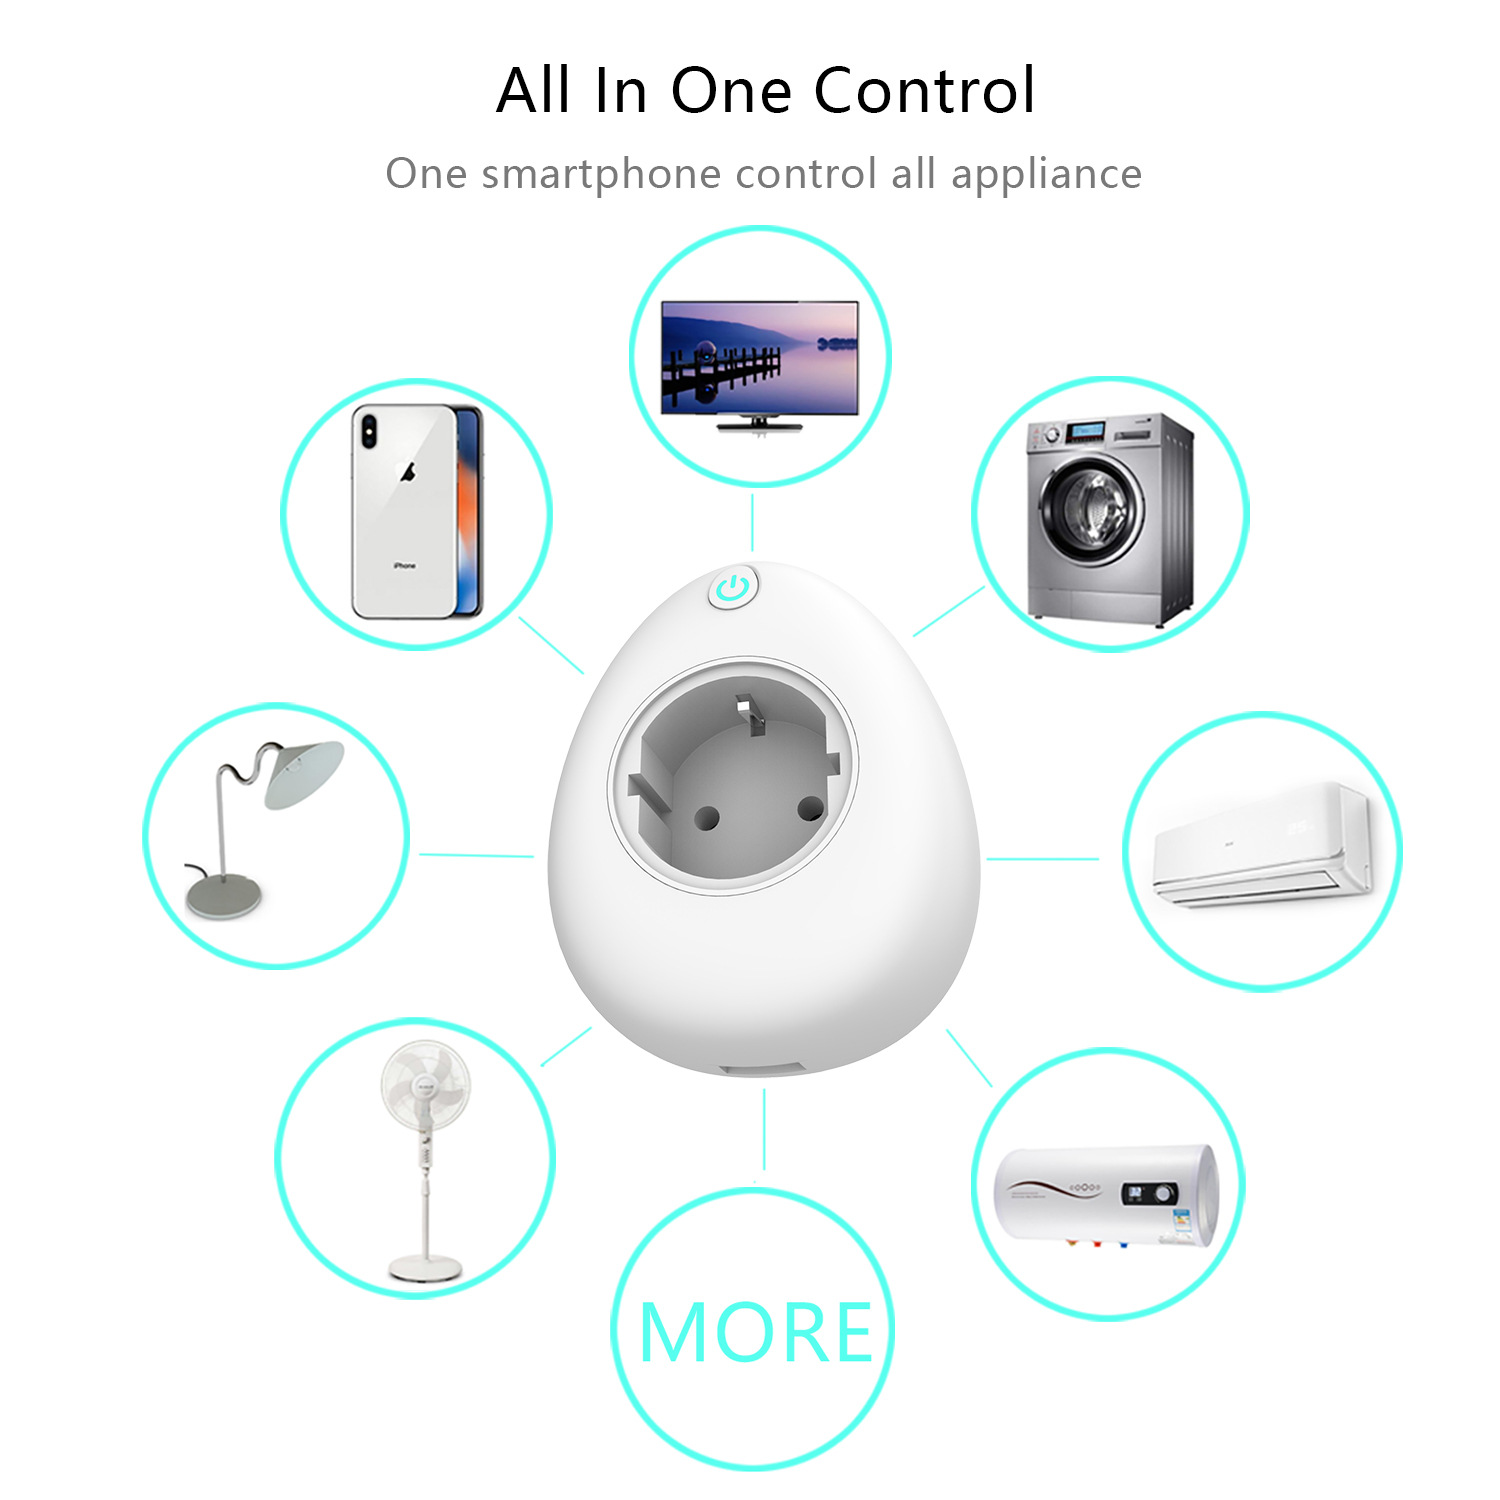 Bakeey 15A USB Charger Smart WiFi Socket Home Switch Voice Remote Control Amazon Alexa Google Home IFTTT Compatible with Tuya APP 10